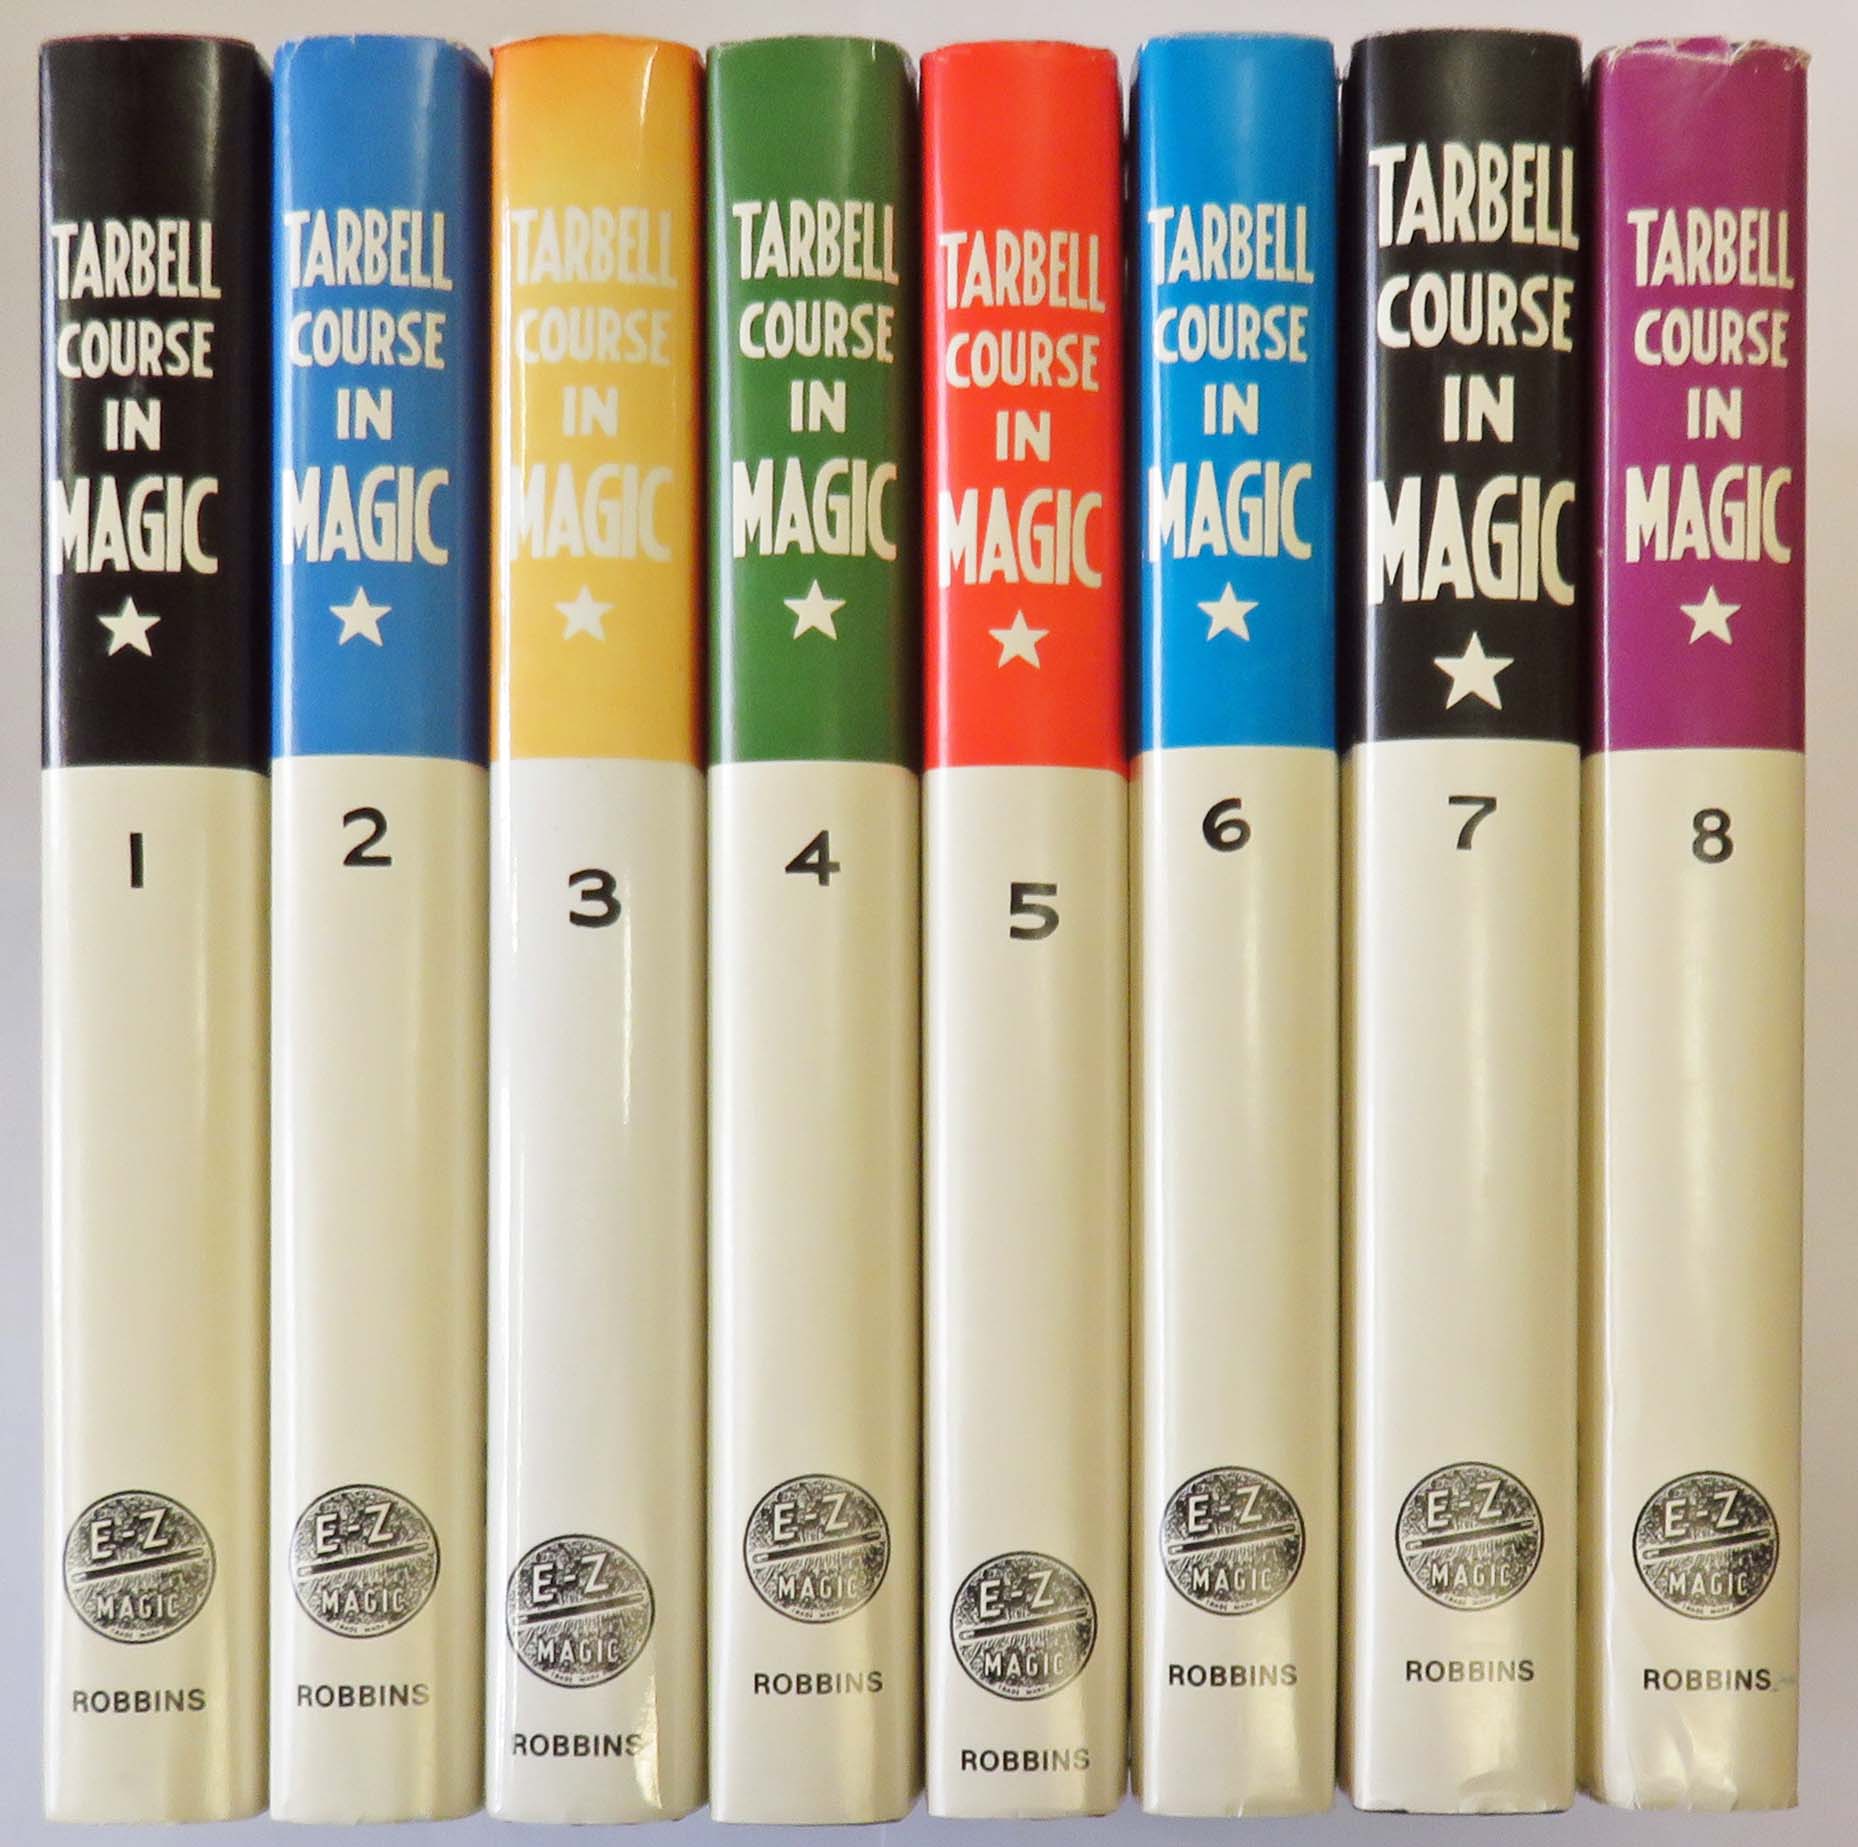 Tarbell Course in Magic Set of Volumes 1 to 8